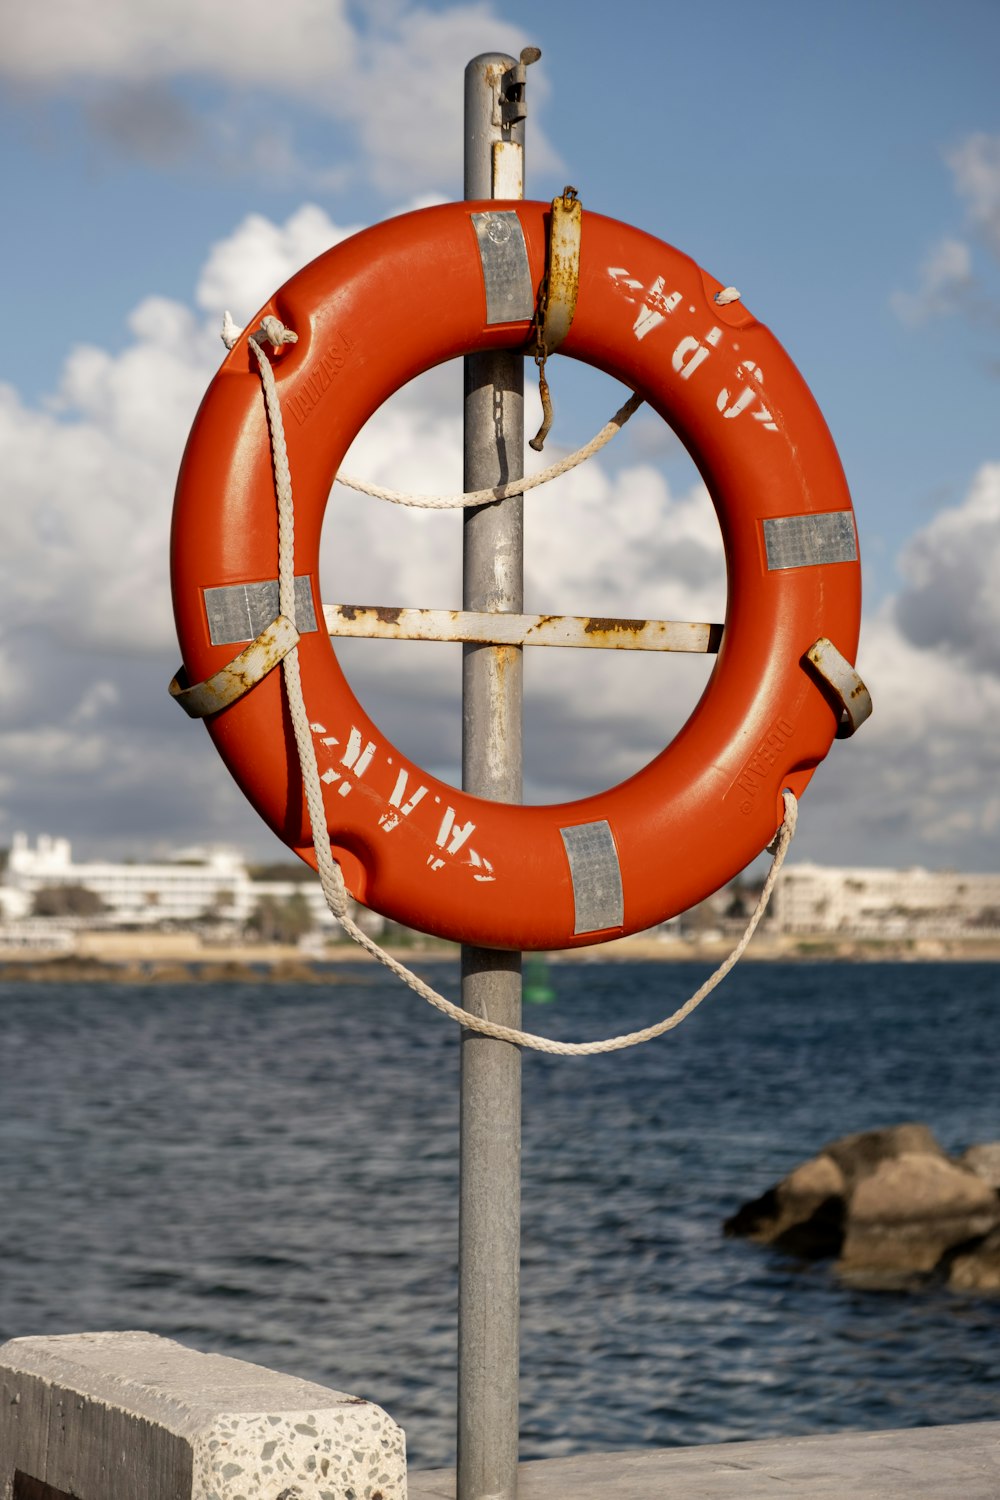 a life preserver on a pole near a body of water